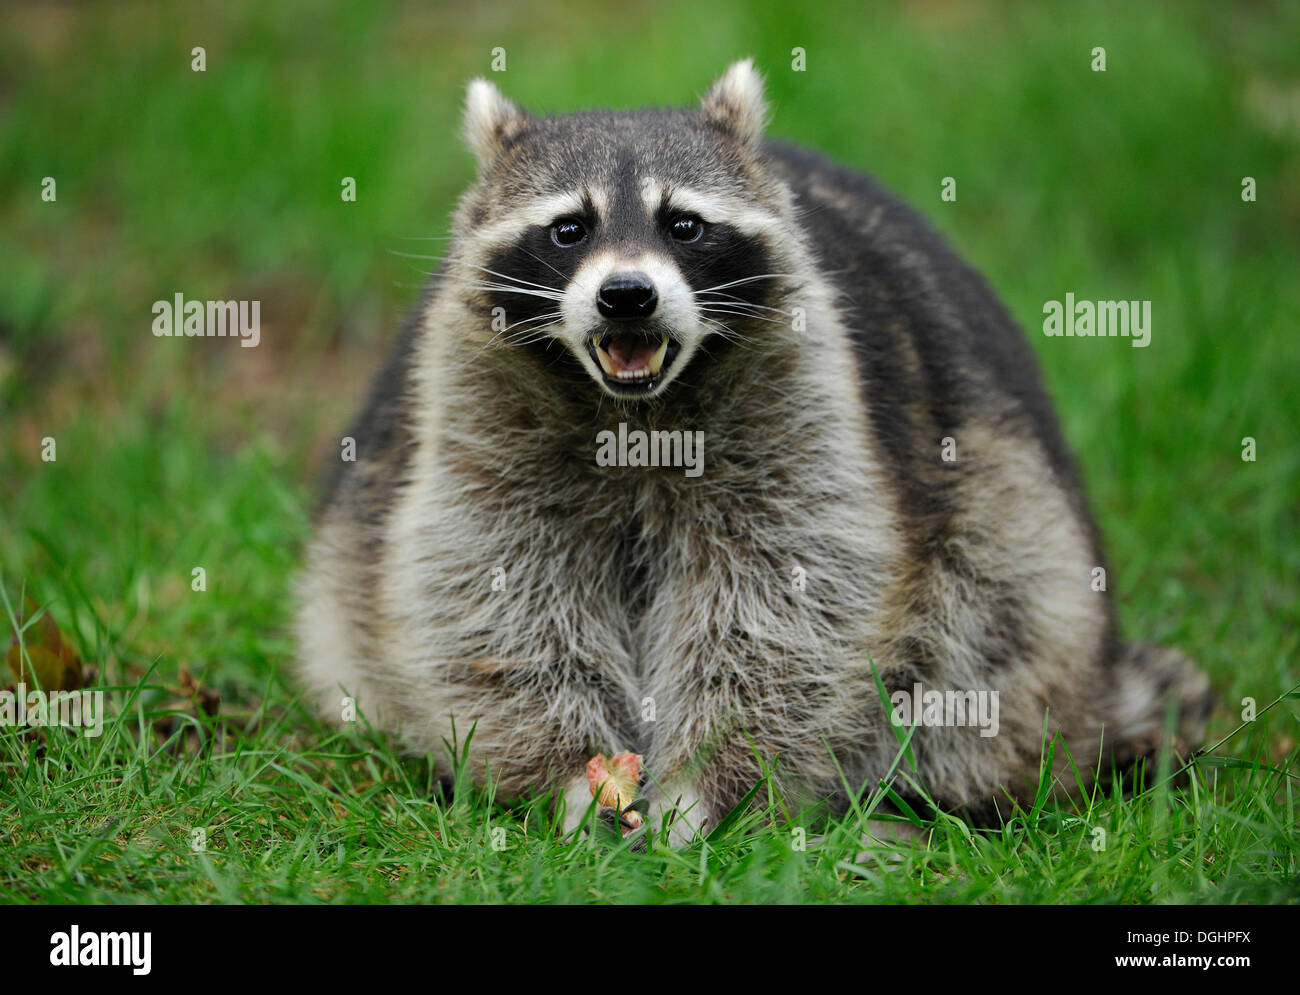 North American Raccoon (Procyon lotor), sitting on a lawn, captive, Hesse, Germany Stock Photo